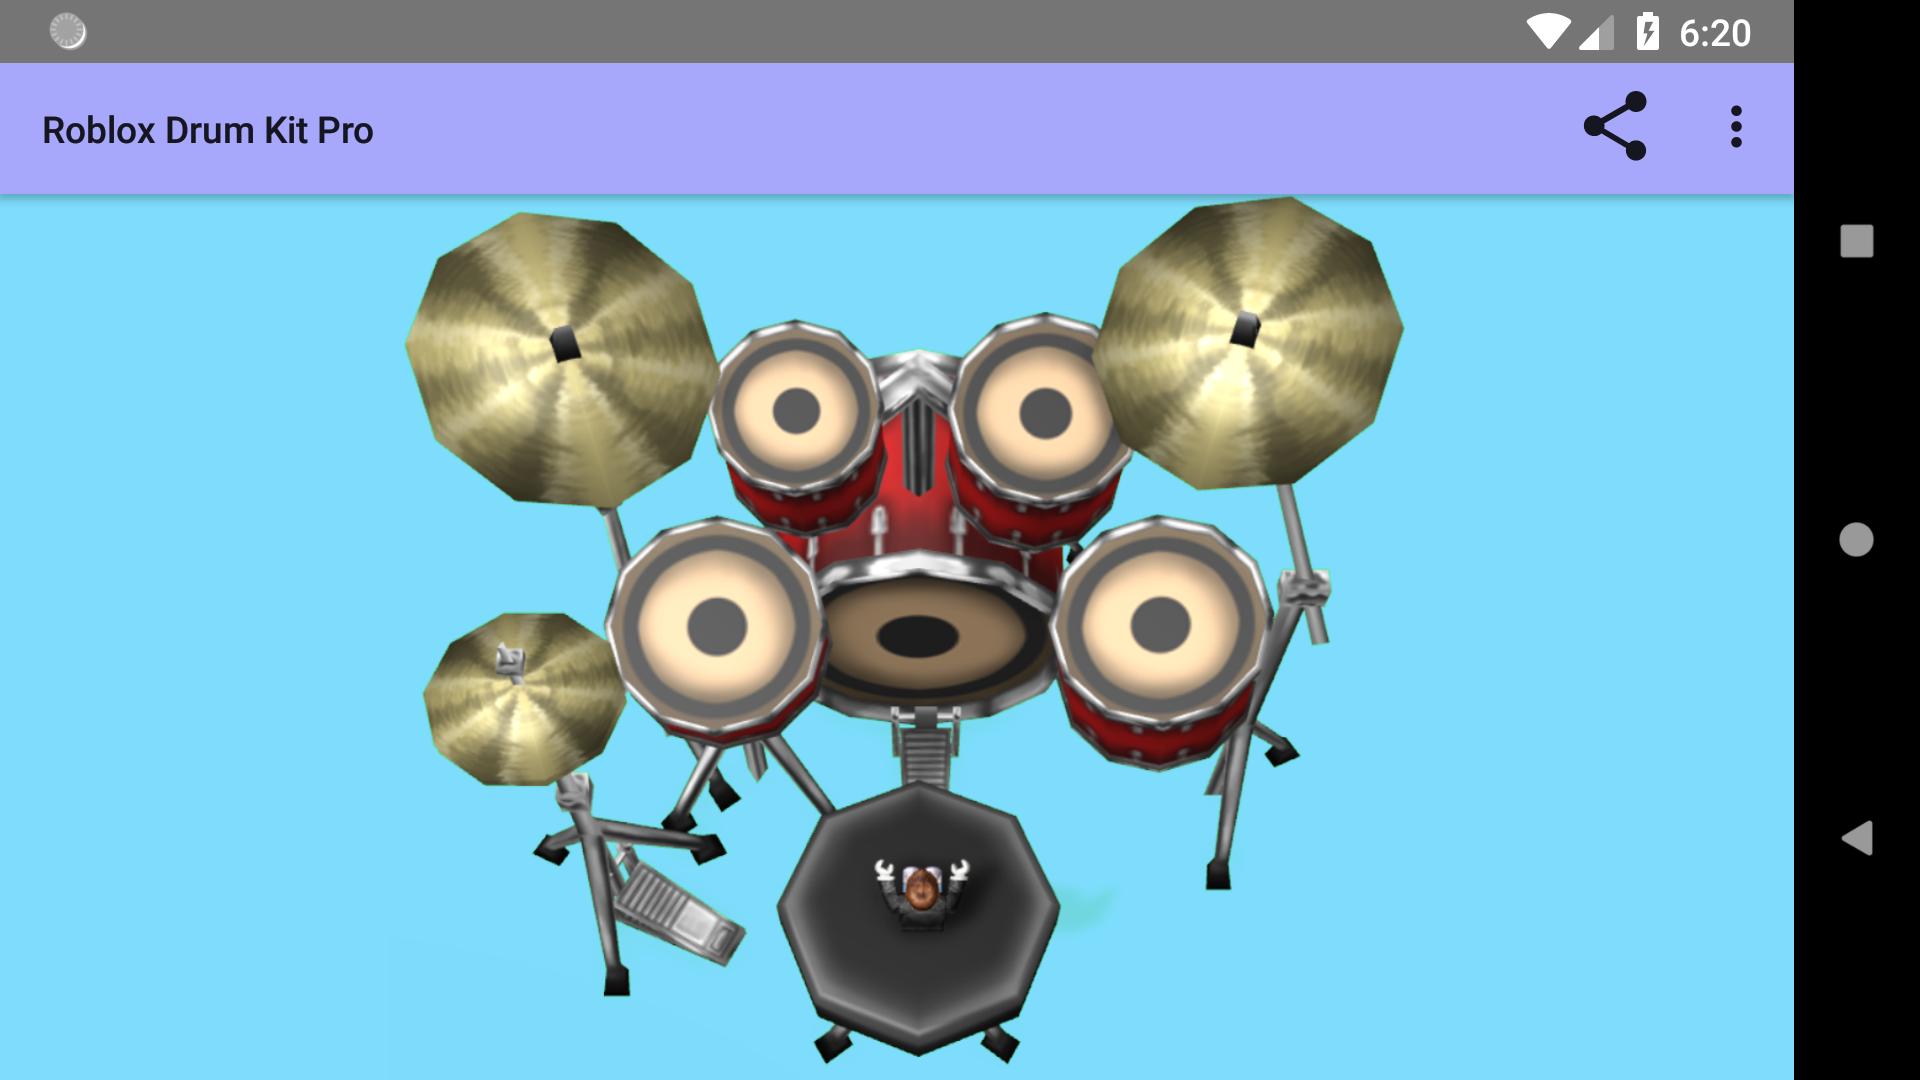 Pro Roblox Oof Drum Kit Death Sound Meme Drums For Android - classic roblox combat game roblox